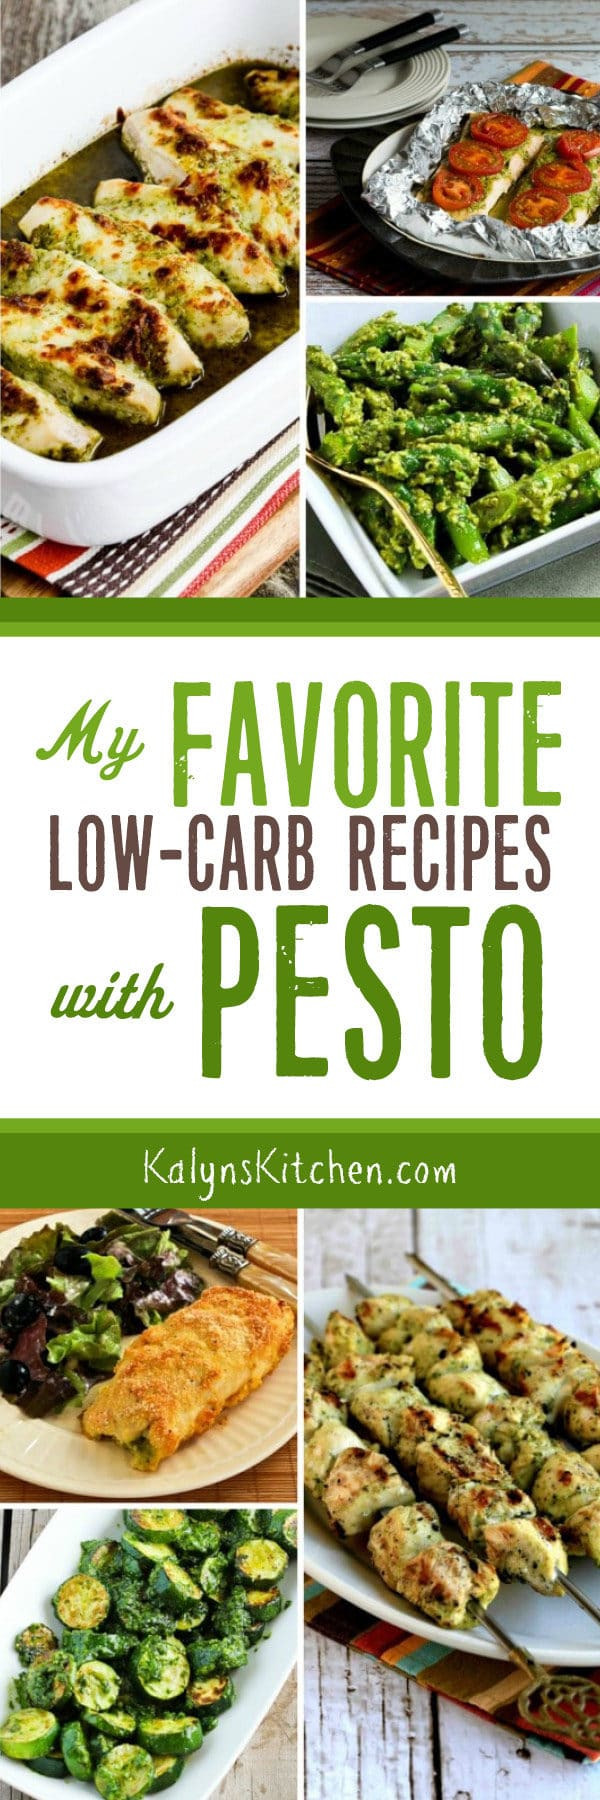 Low Carb Pesto Recipes
 My Favorite Low Carb Recipes with Pesto Kalyn s Kitchen